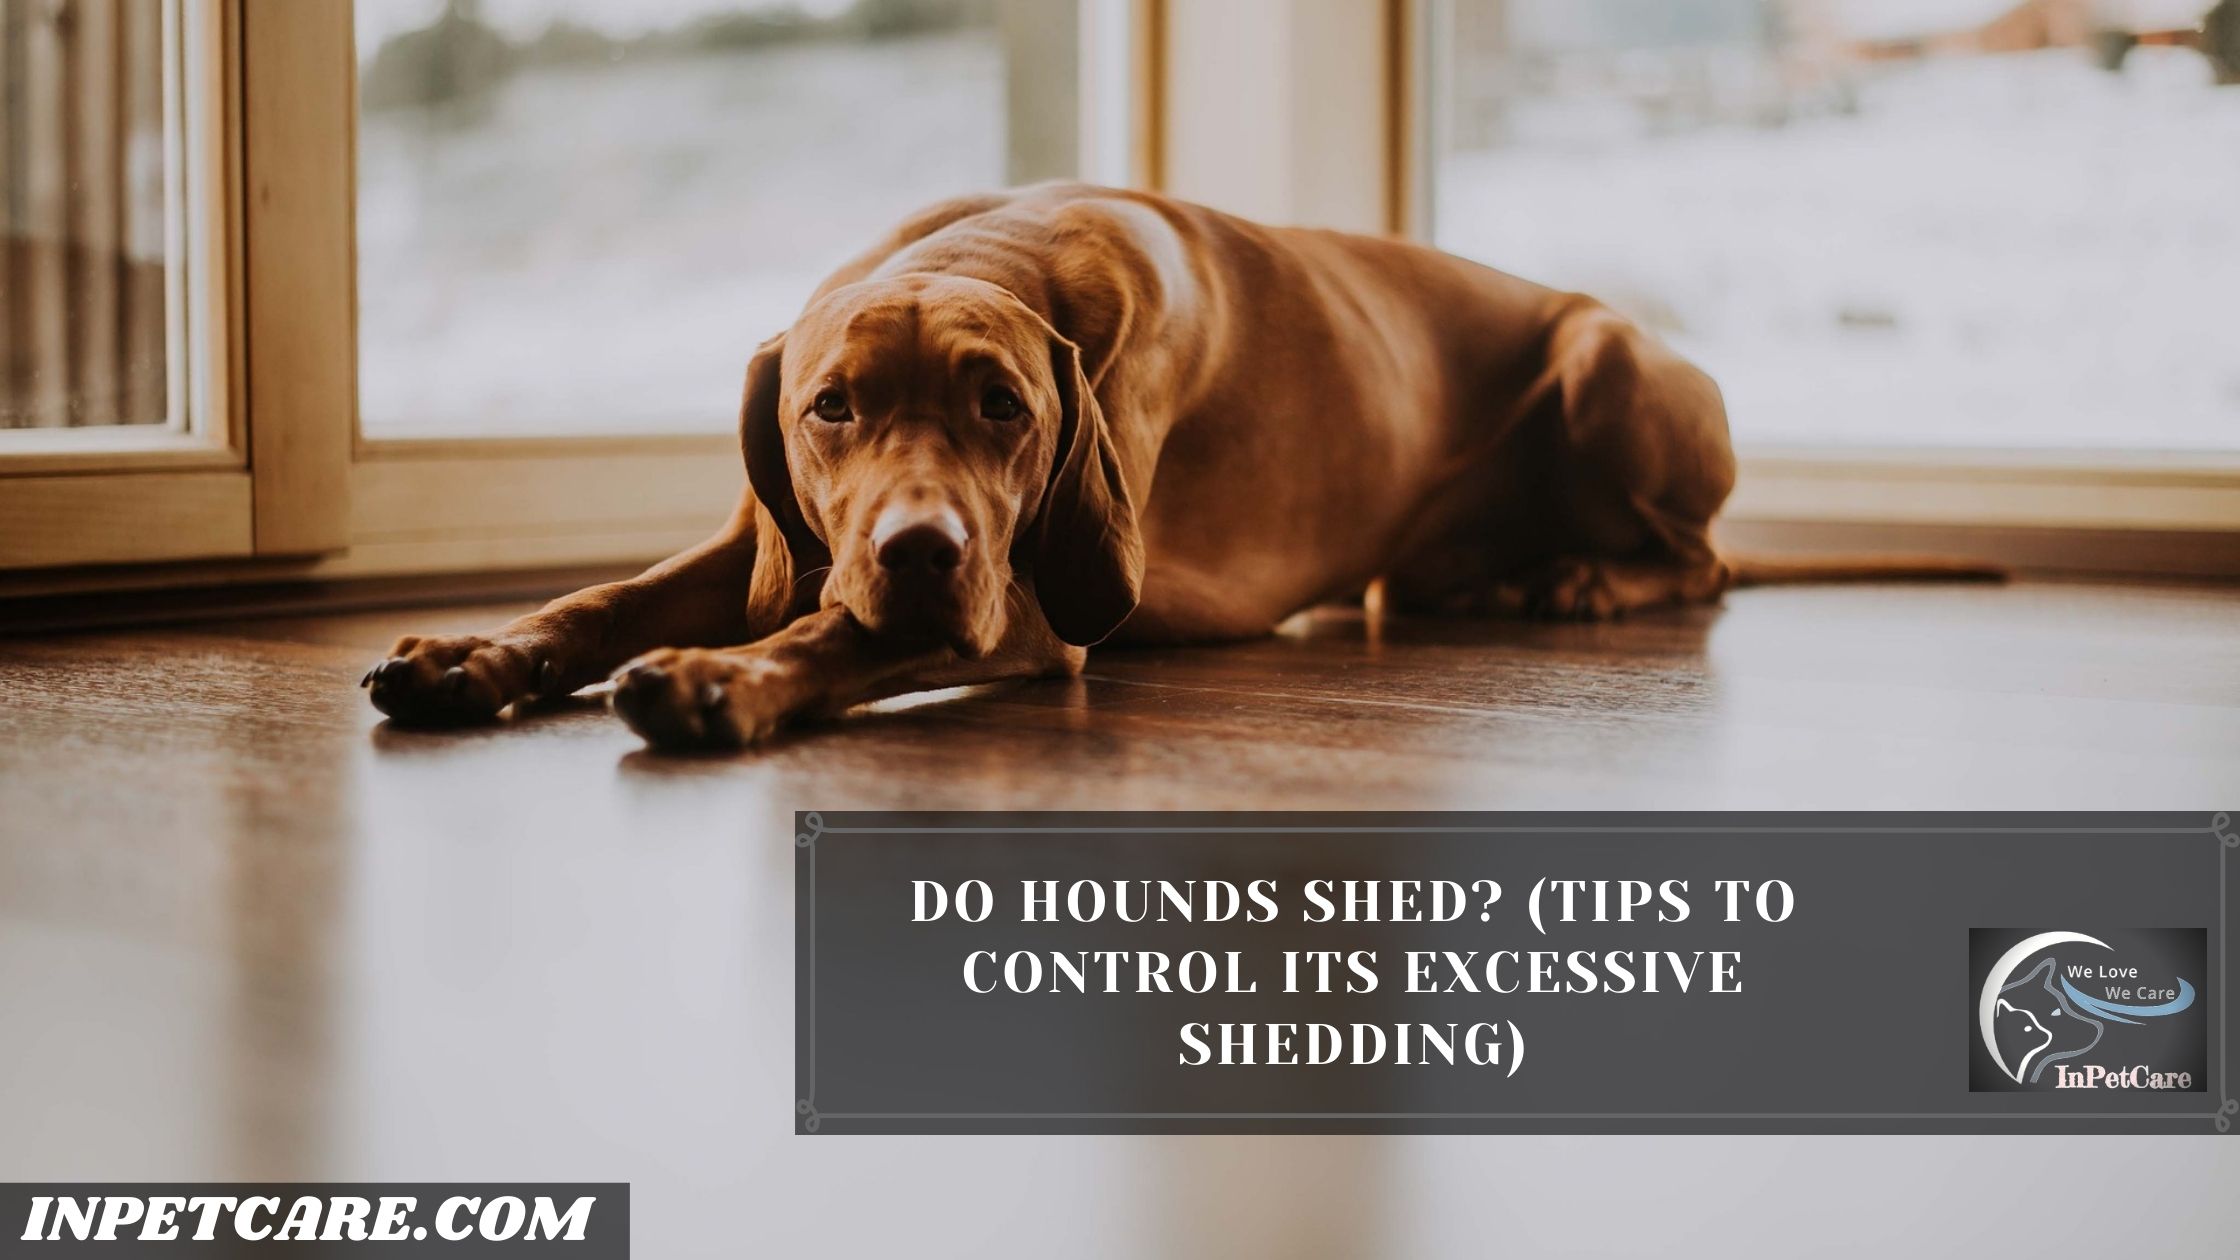 Do Hounds Shed? (Tips To Control Its Excessive Shedding)